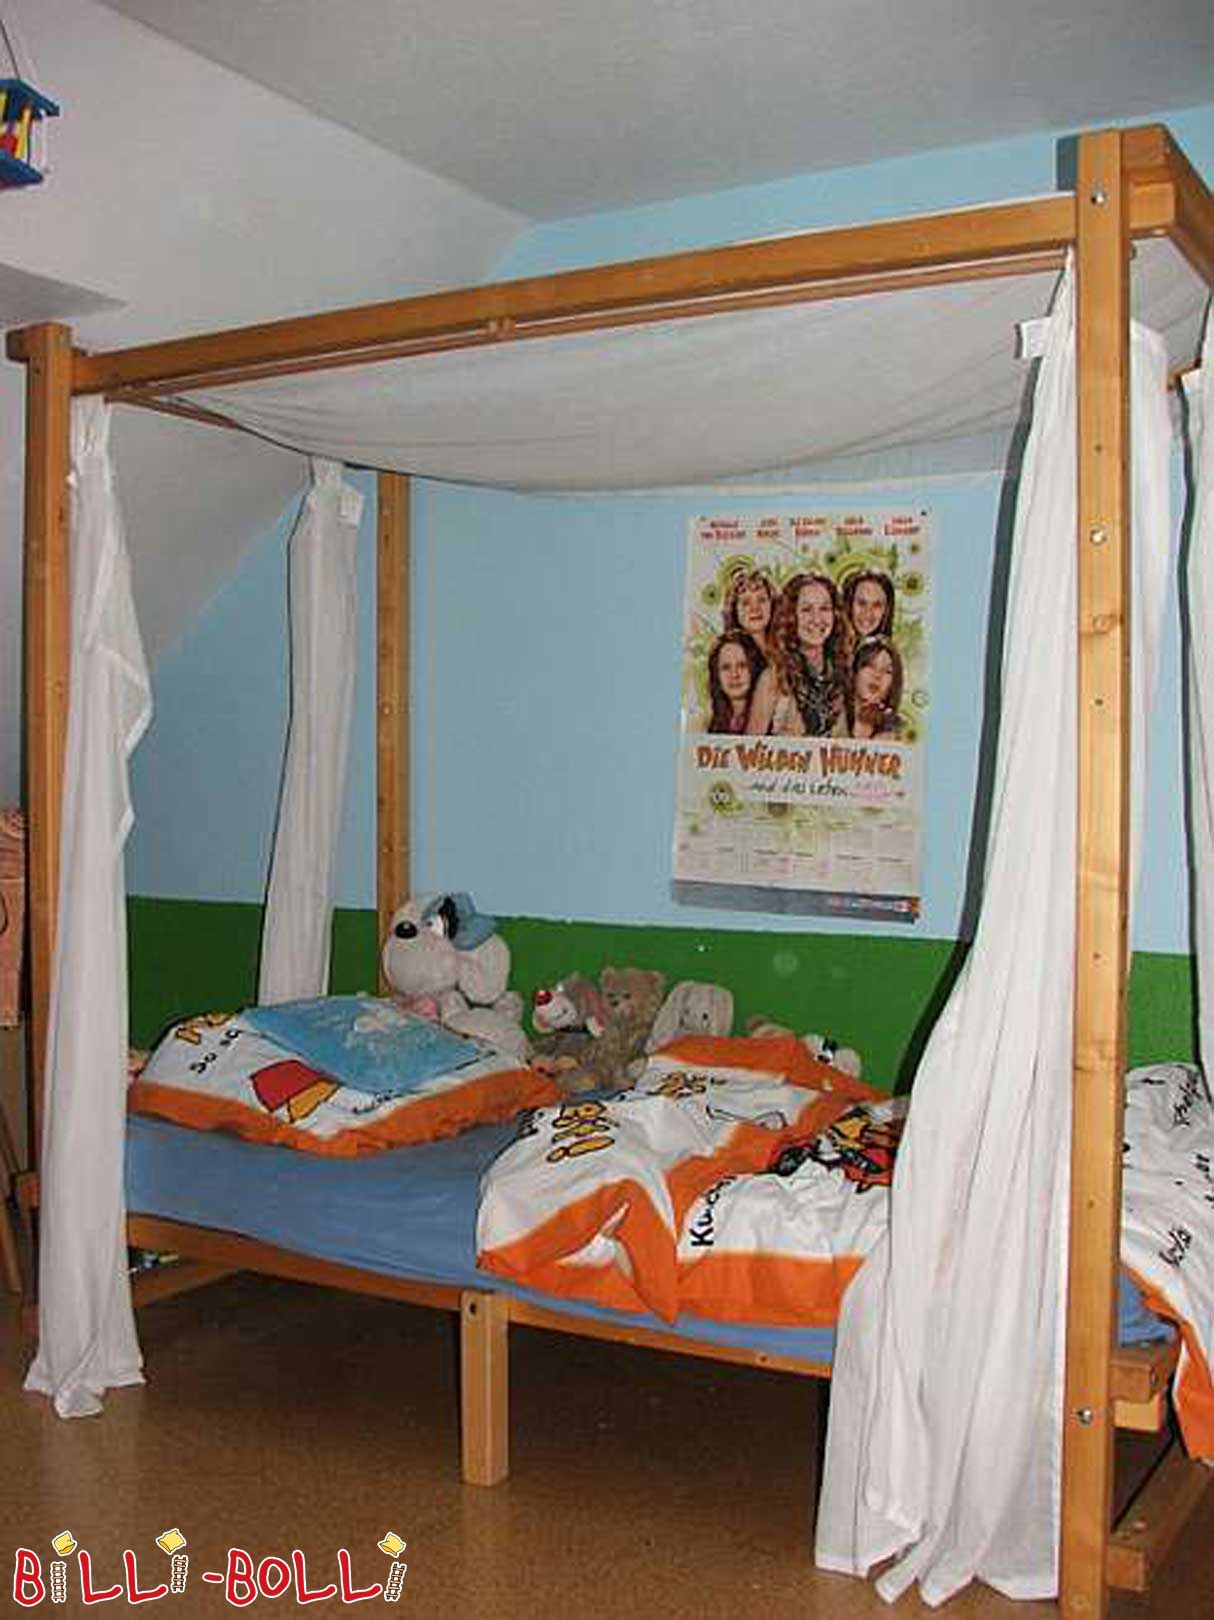 Billi-Bolli four-poster bed or pirate loft bed (Category: second hand loft bed)